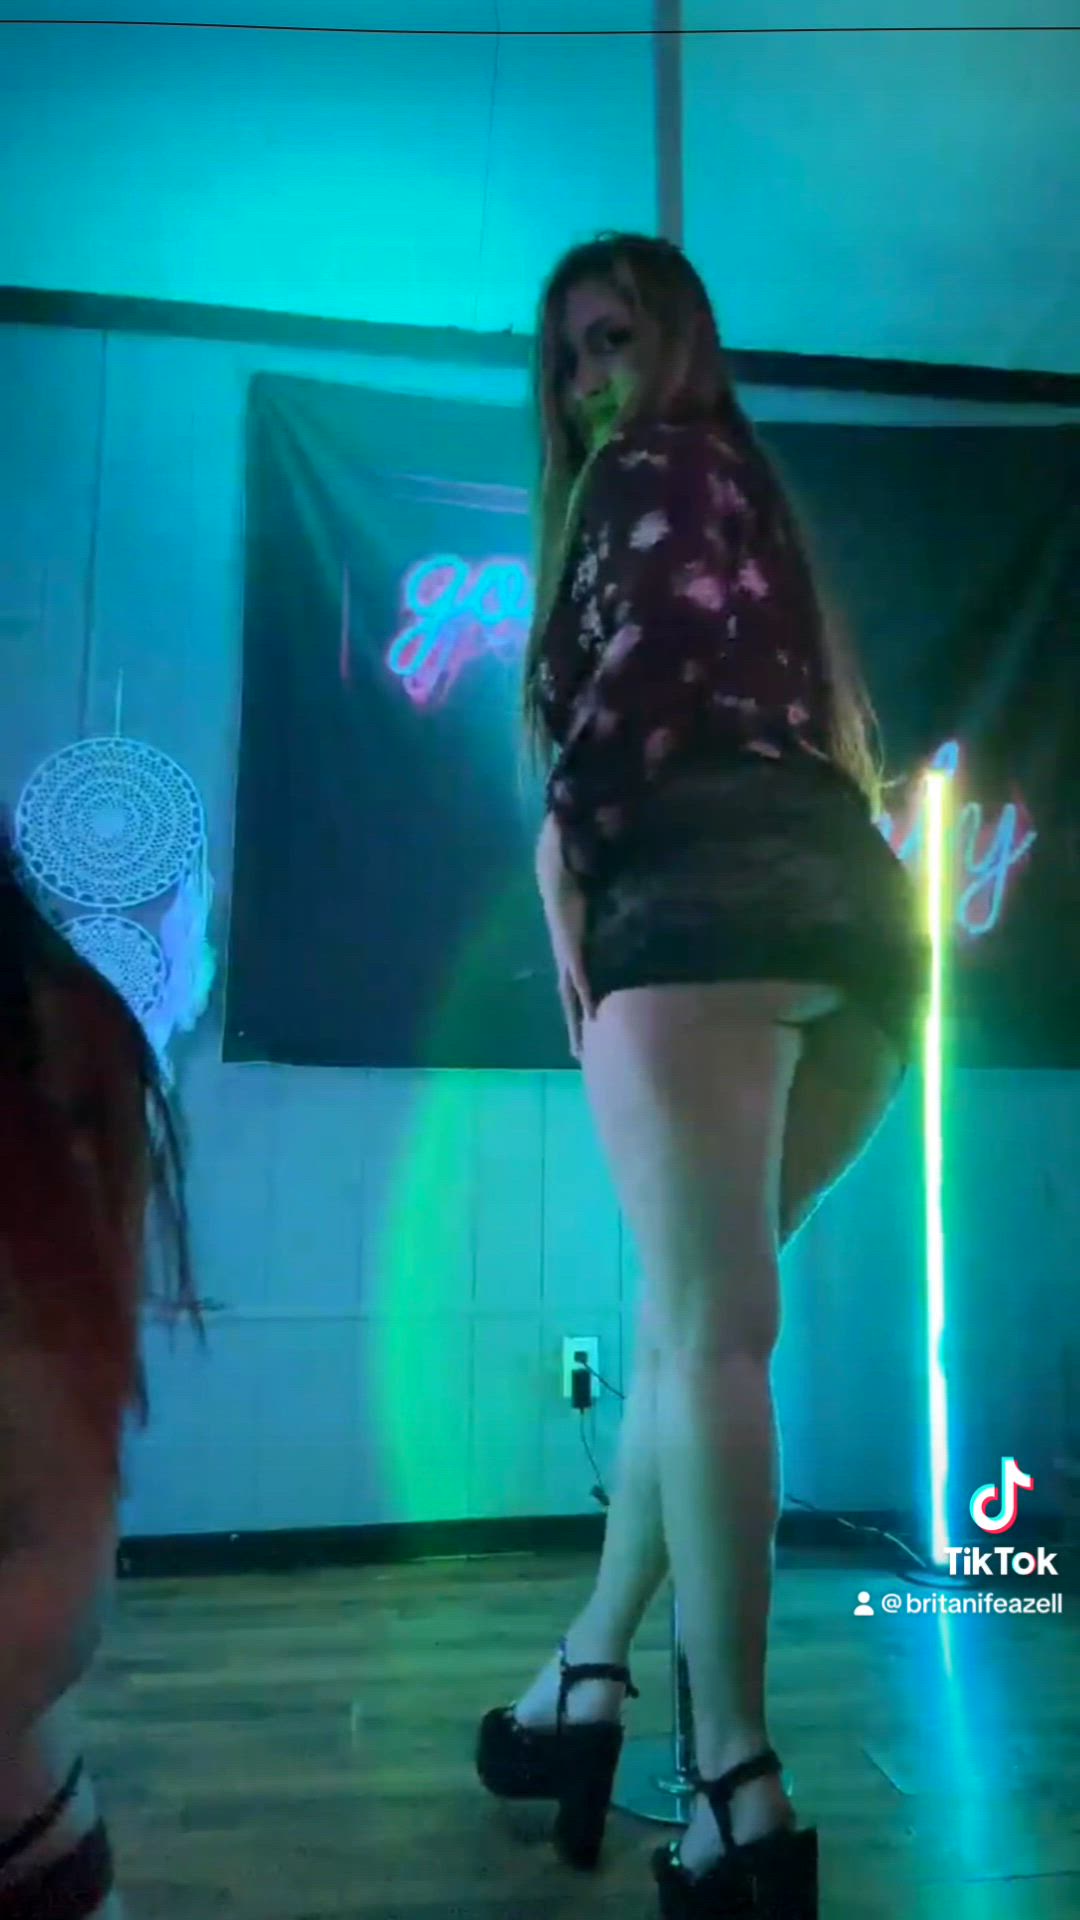 Ass porn video with onlyfans model snowbunnynola <strong>@snowbunnynola</strong>